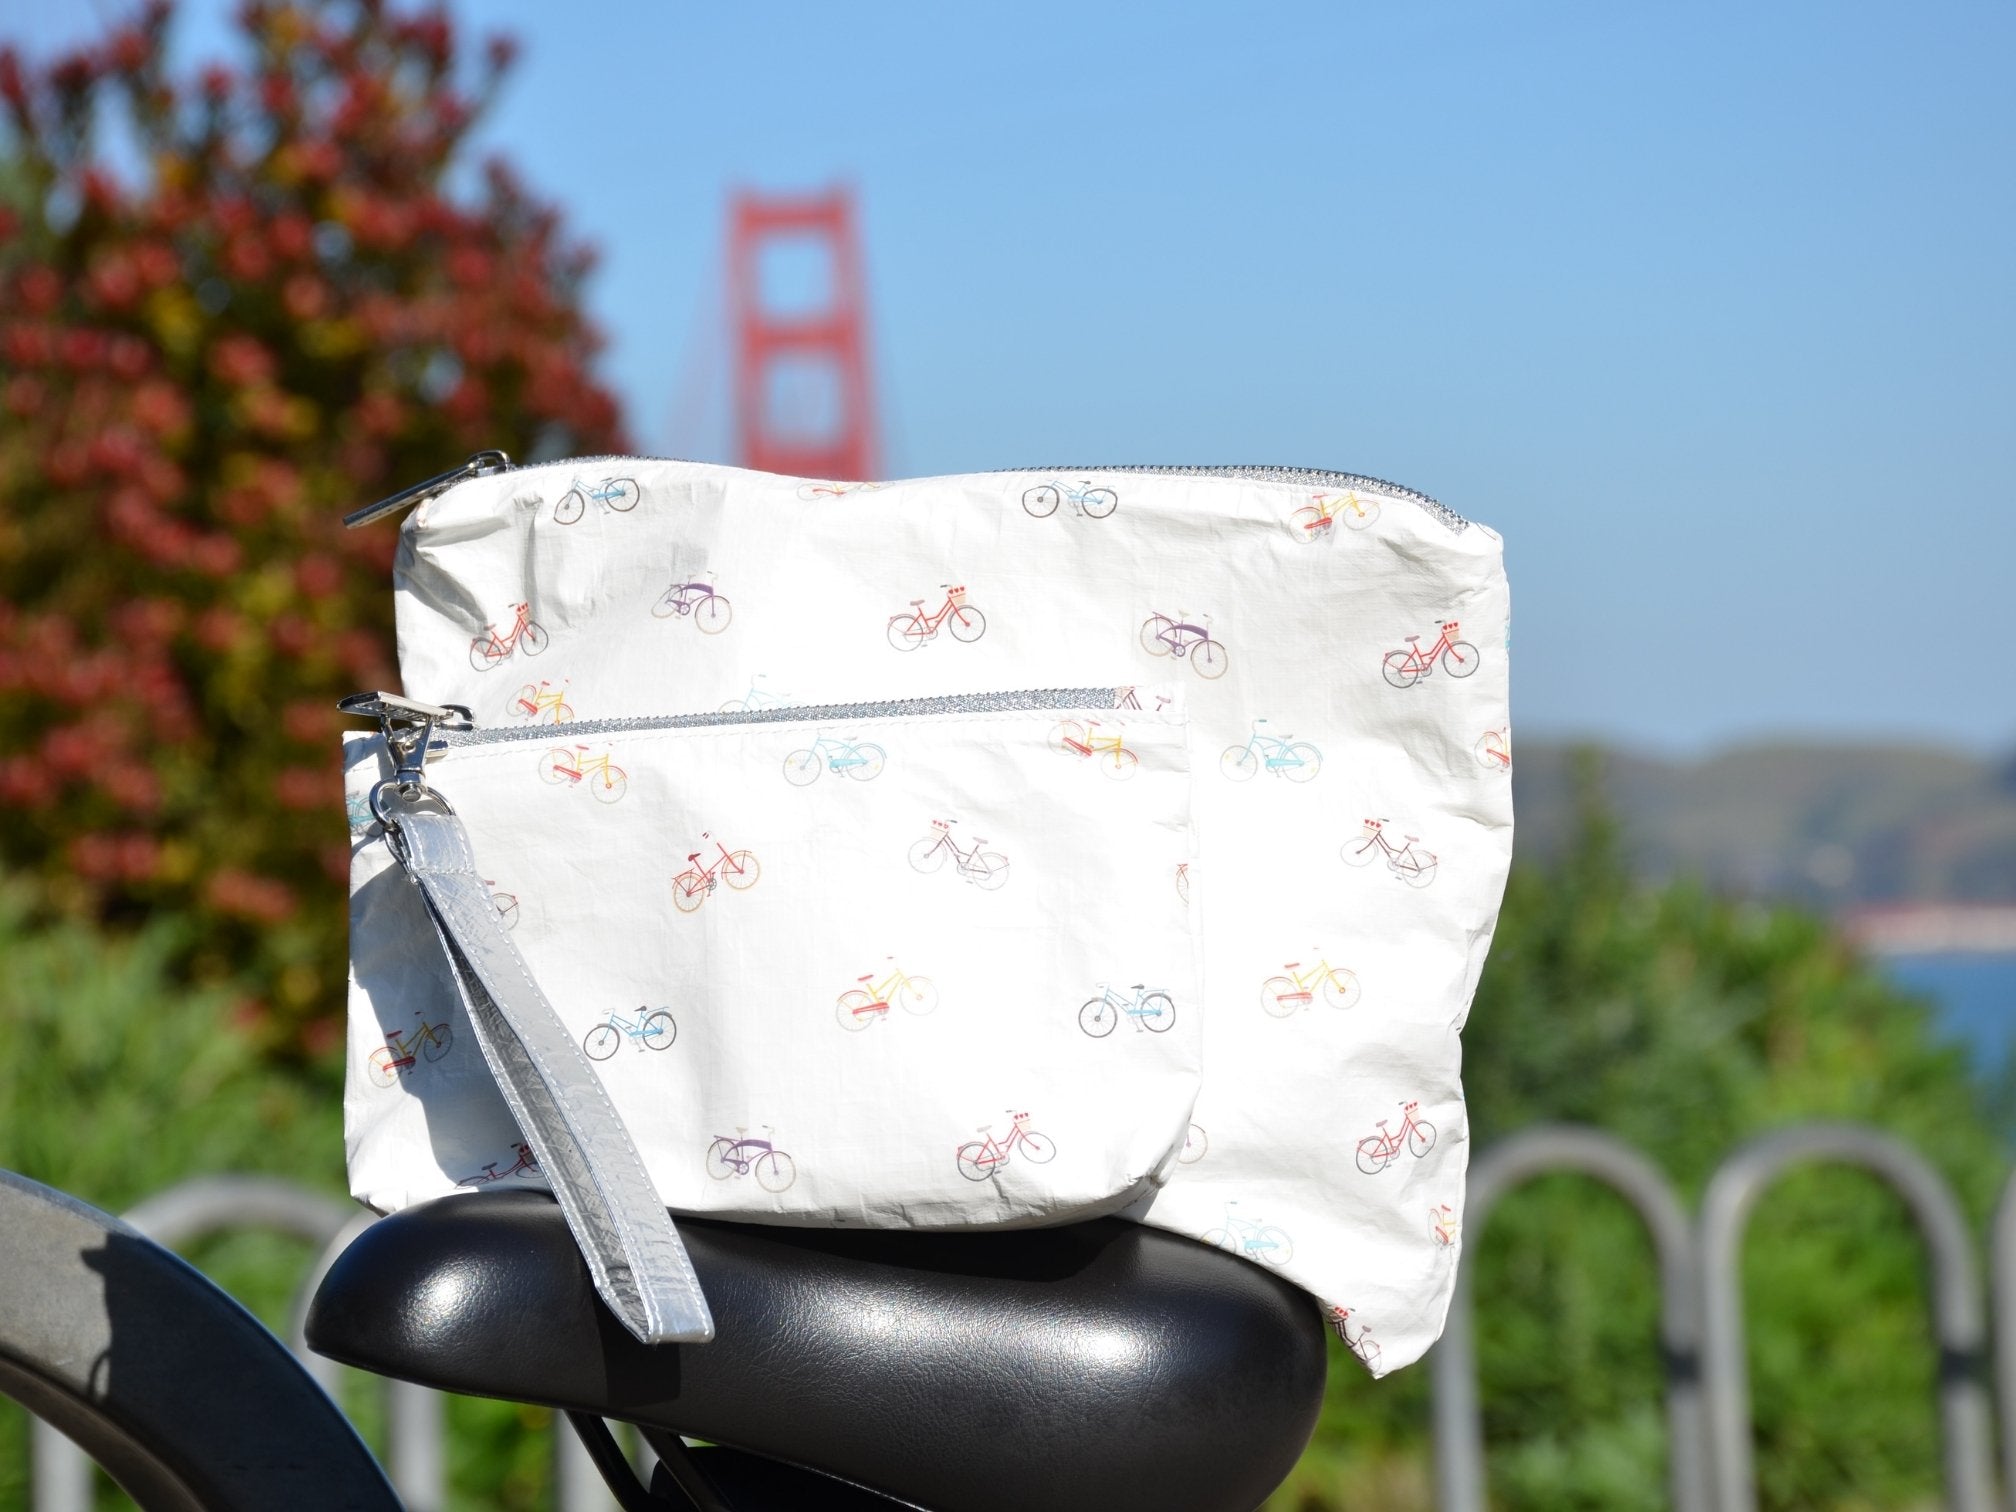 Set of two zipper pouches with colorful bicycles pattern sitting on bike seat